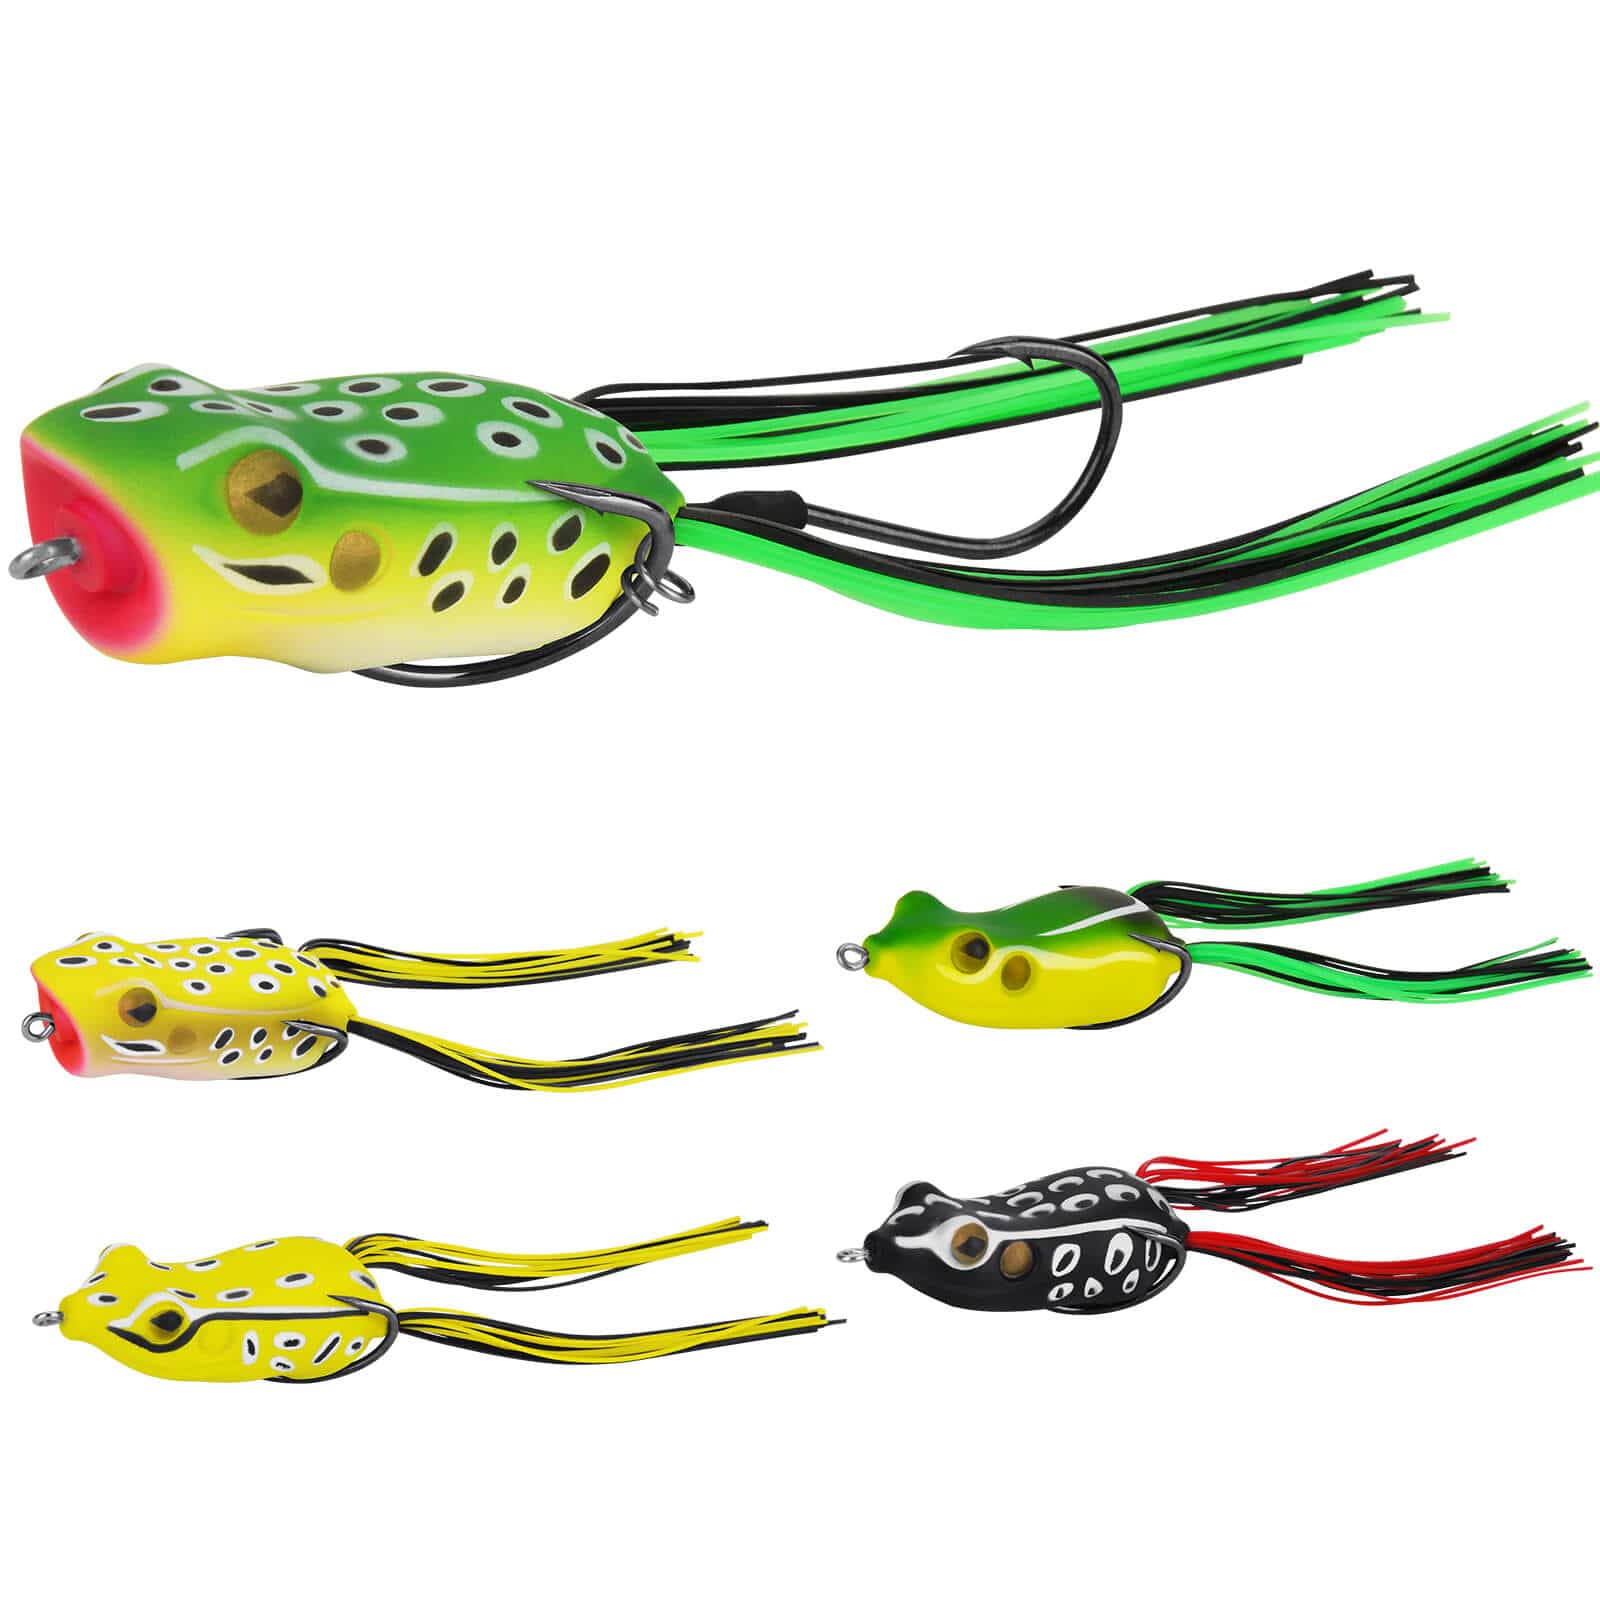 Buy Cooltto 91pcs Fishing Lures Set Including Frog Lures